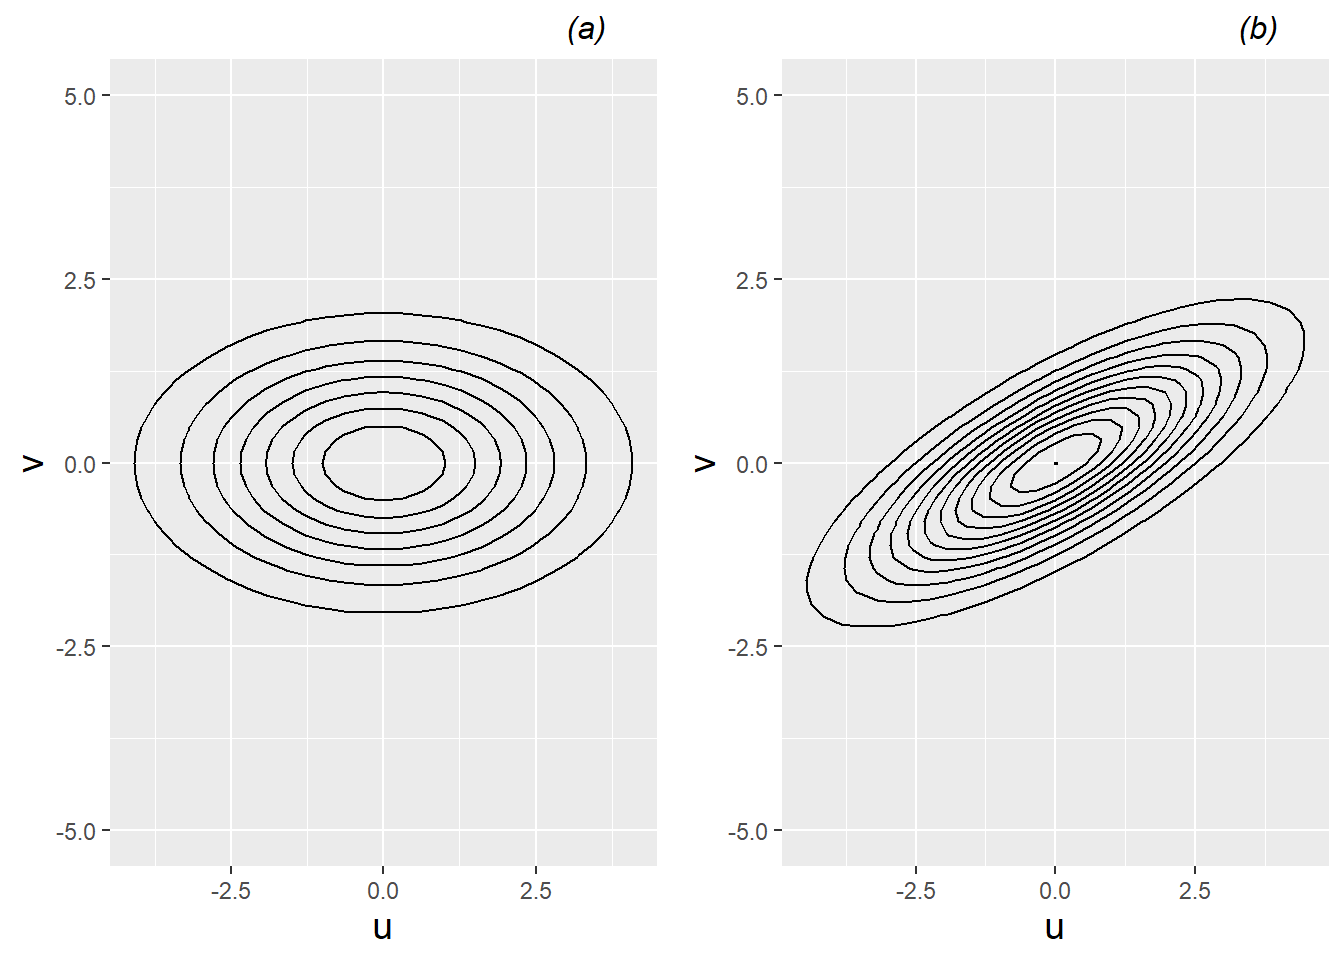 Contour plots illustrating a multivariate normal density with (a) no correlation between error terms, and (b) positive correlation between error terms.